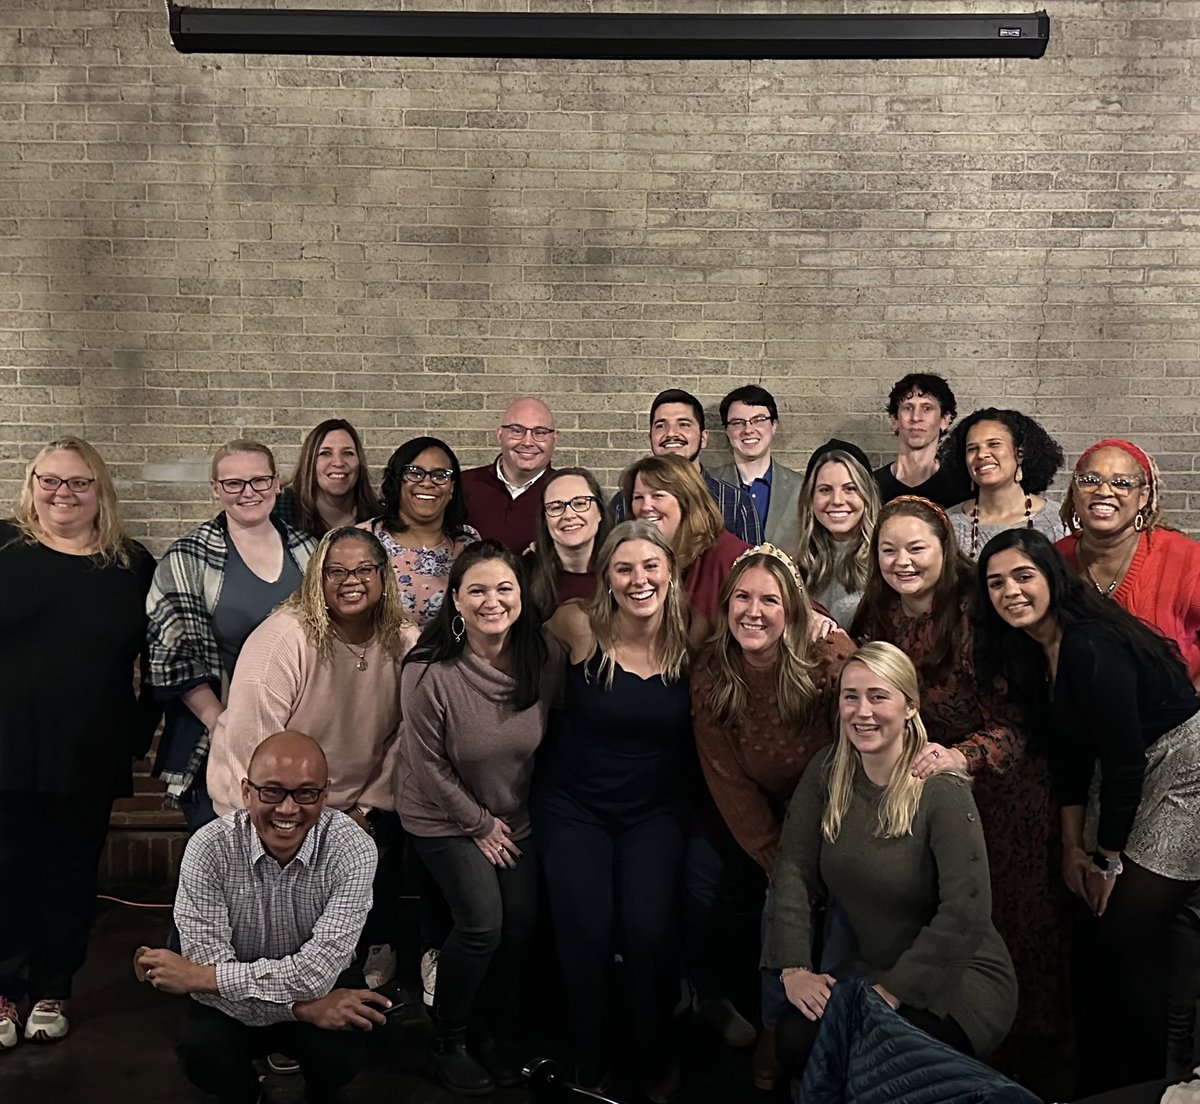 We had the best time this past weekend at our annual Holiday Party! Thanks to our Wellness Team for organizing and to Footnote for the fantastic venue!